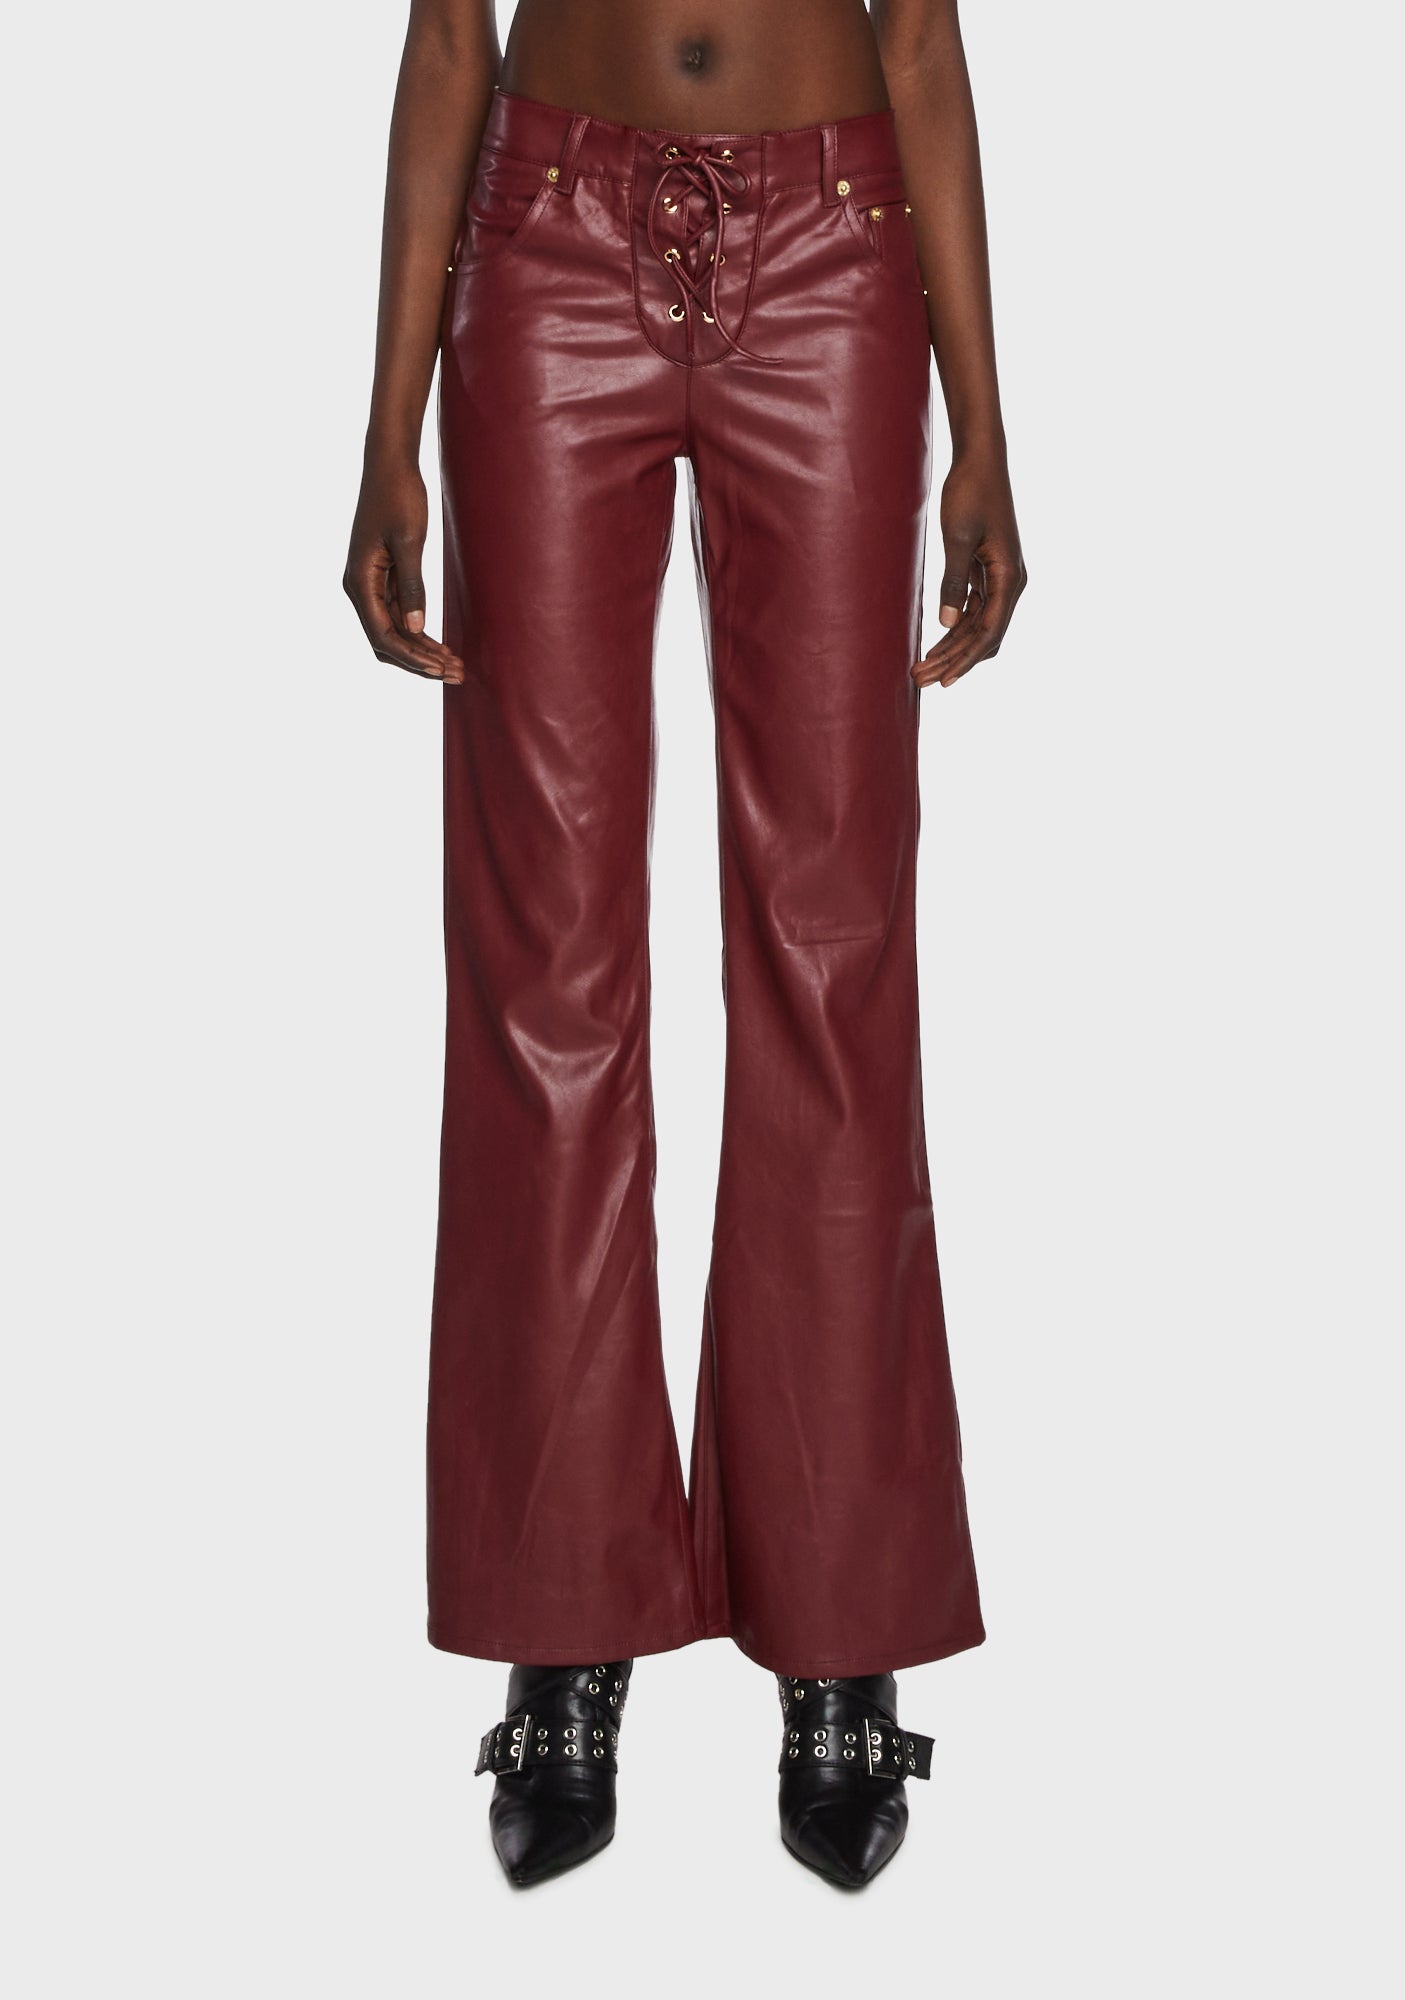 Jagger & Stone Vegan Leather Lace Up Pants - Red – Dolls Kill